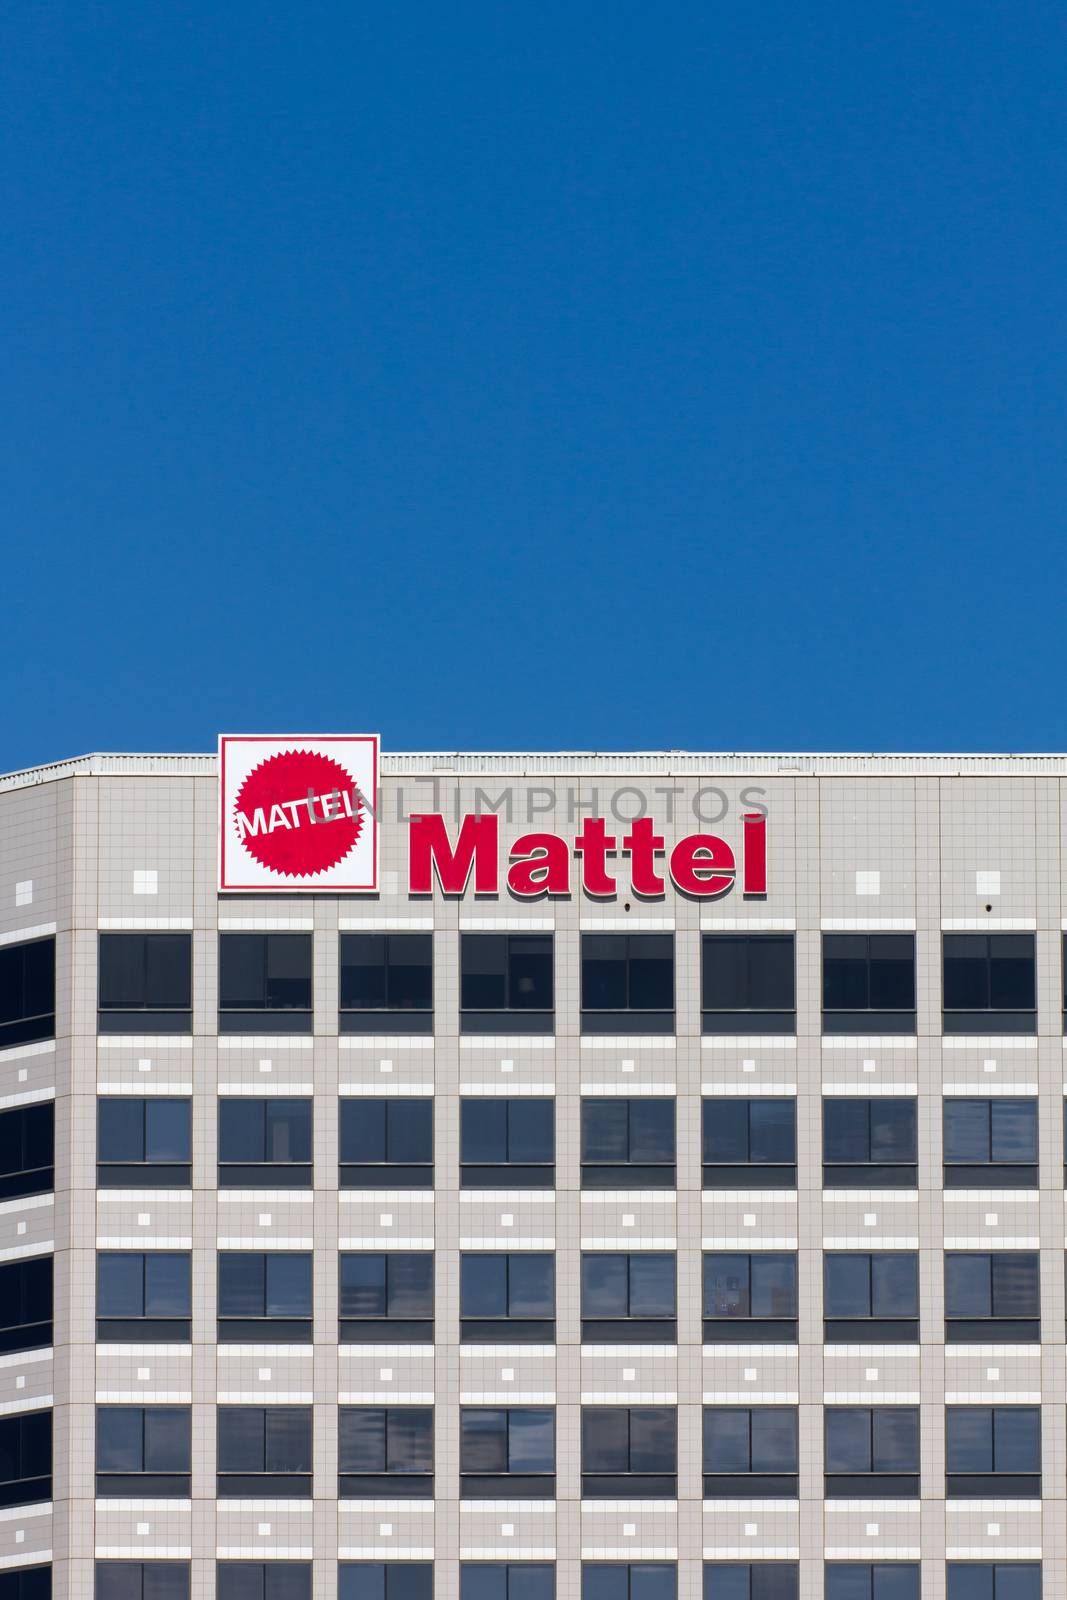 EL SEGUNDO, CA/USA - OCTOBER 13, 2014: Mattel world corporate headquarters building. Mattel, Inc. an American toy manufacturing company founded in 1945.